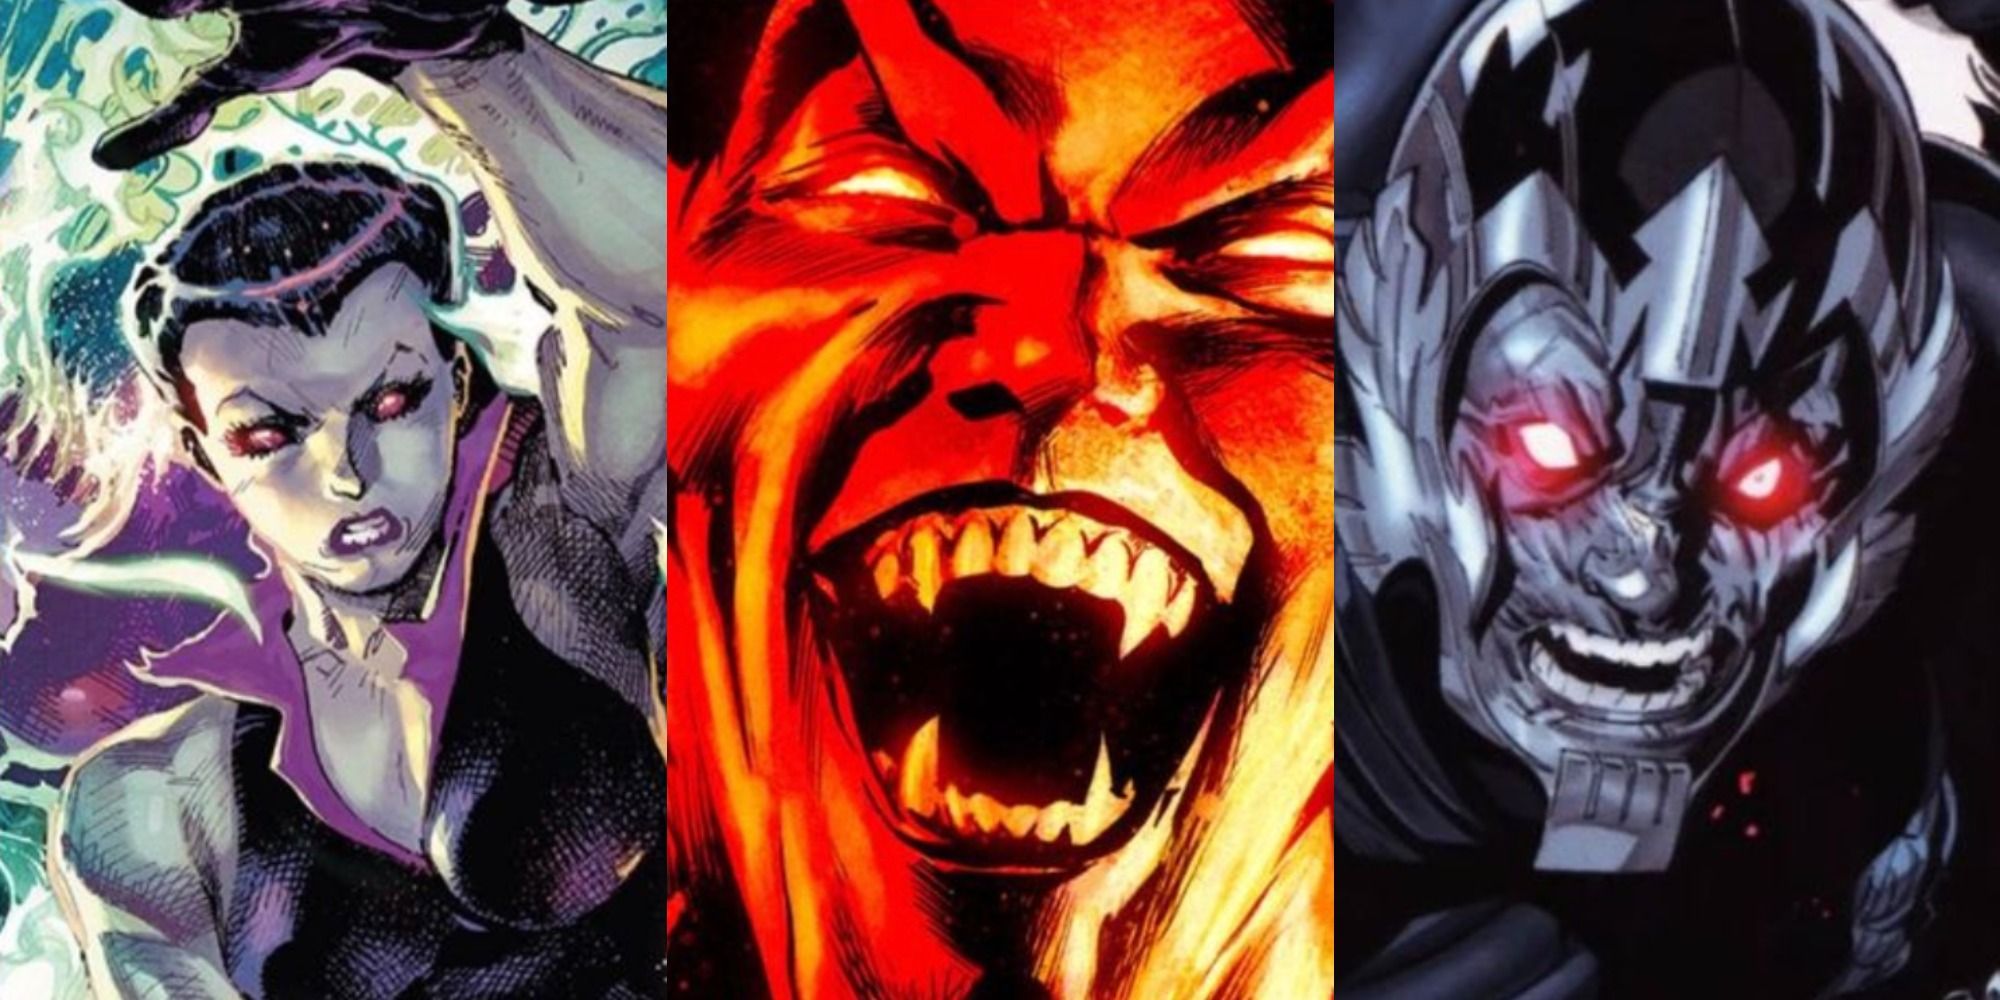 Side by side images of 3 villains from Ghost Rider comics